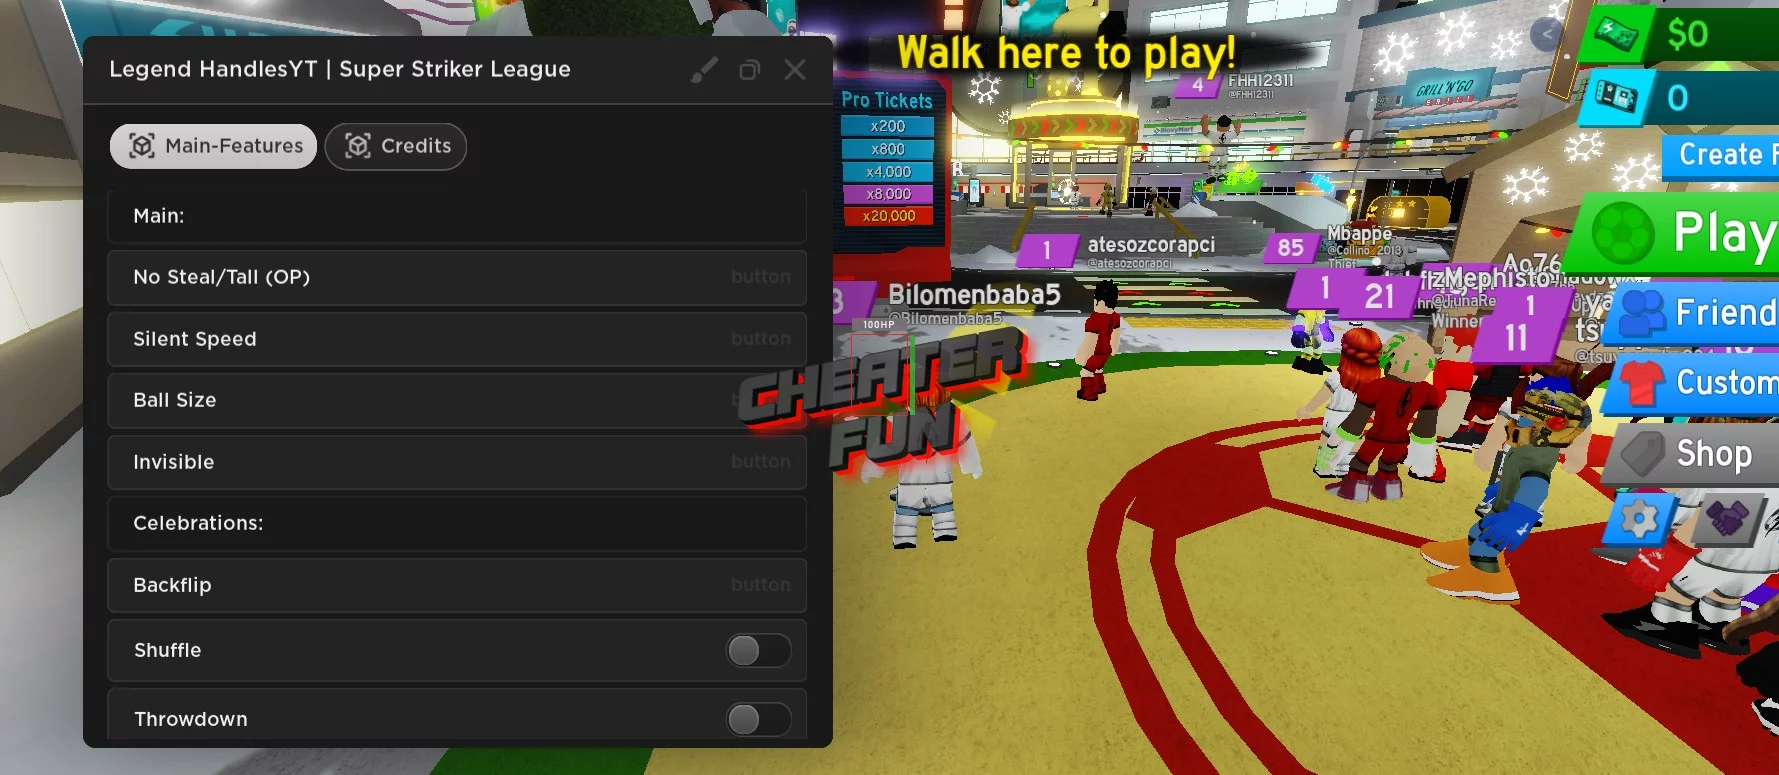 Super Striker League Charges into Roblox on Xbox One - Xbox Wire